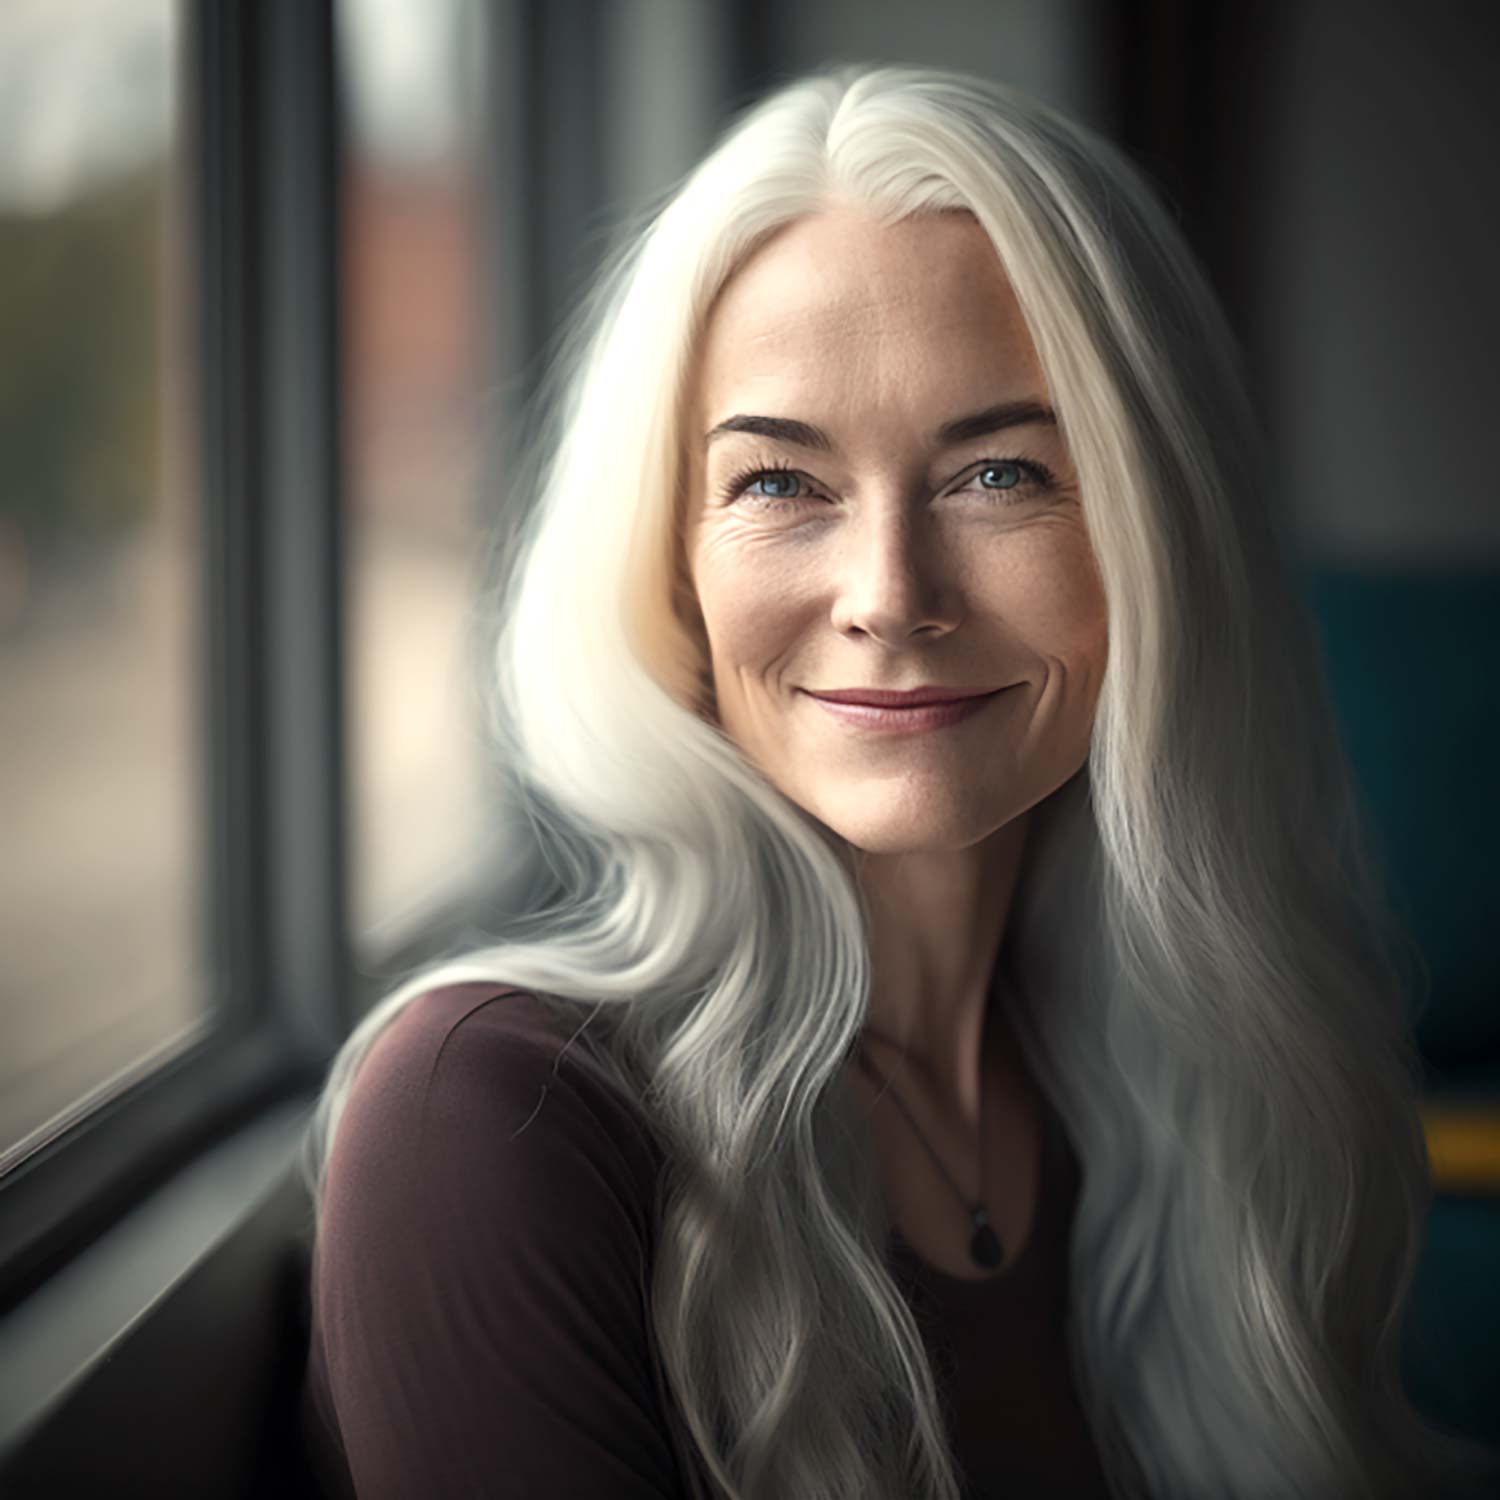 This image features an illustration of a woman with long white hair.